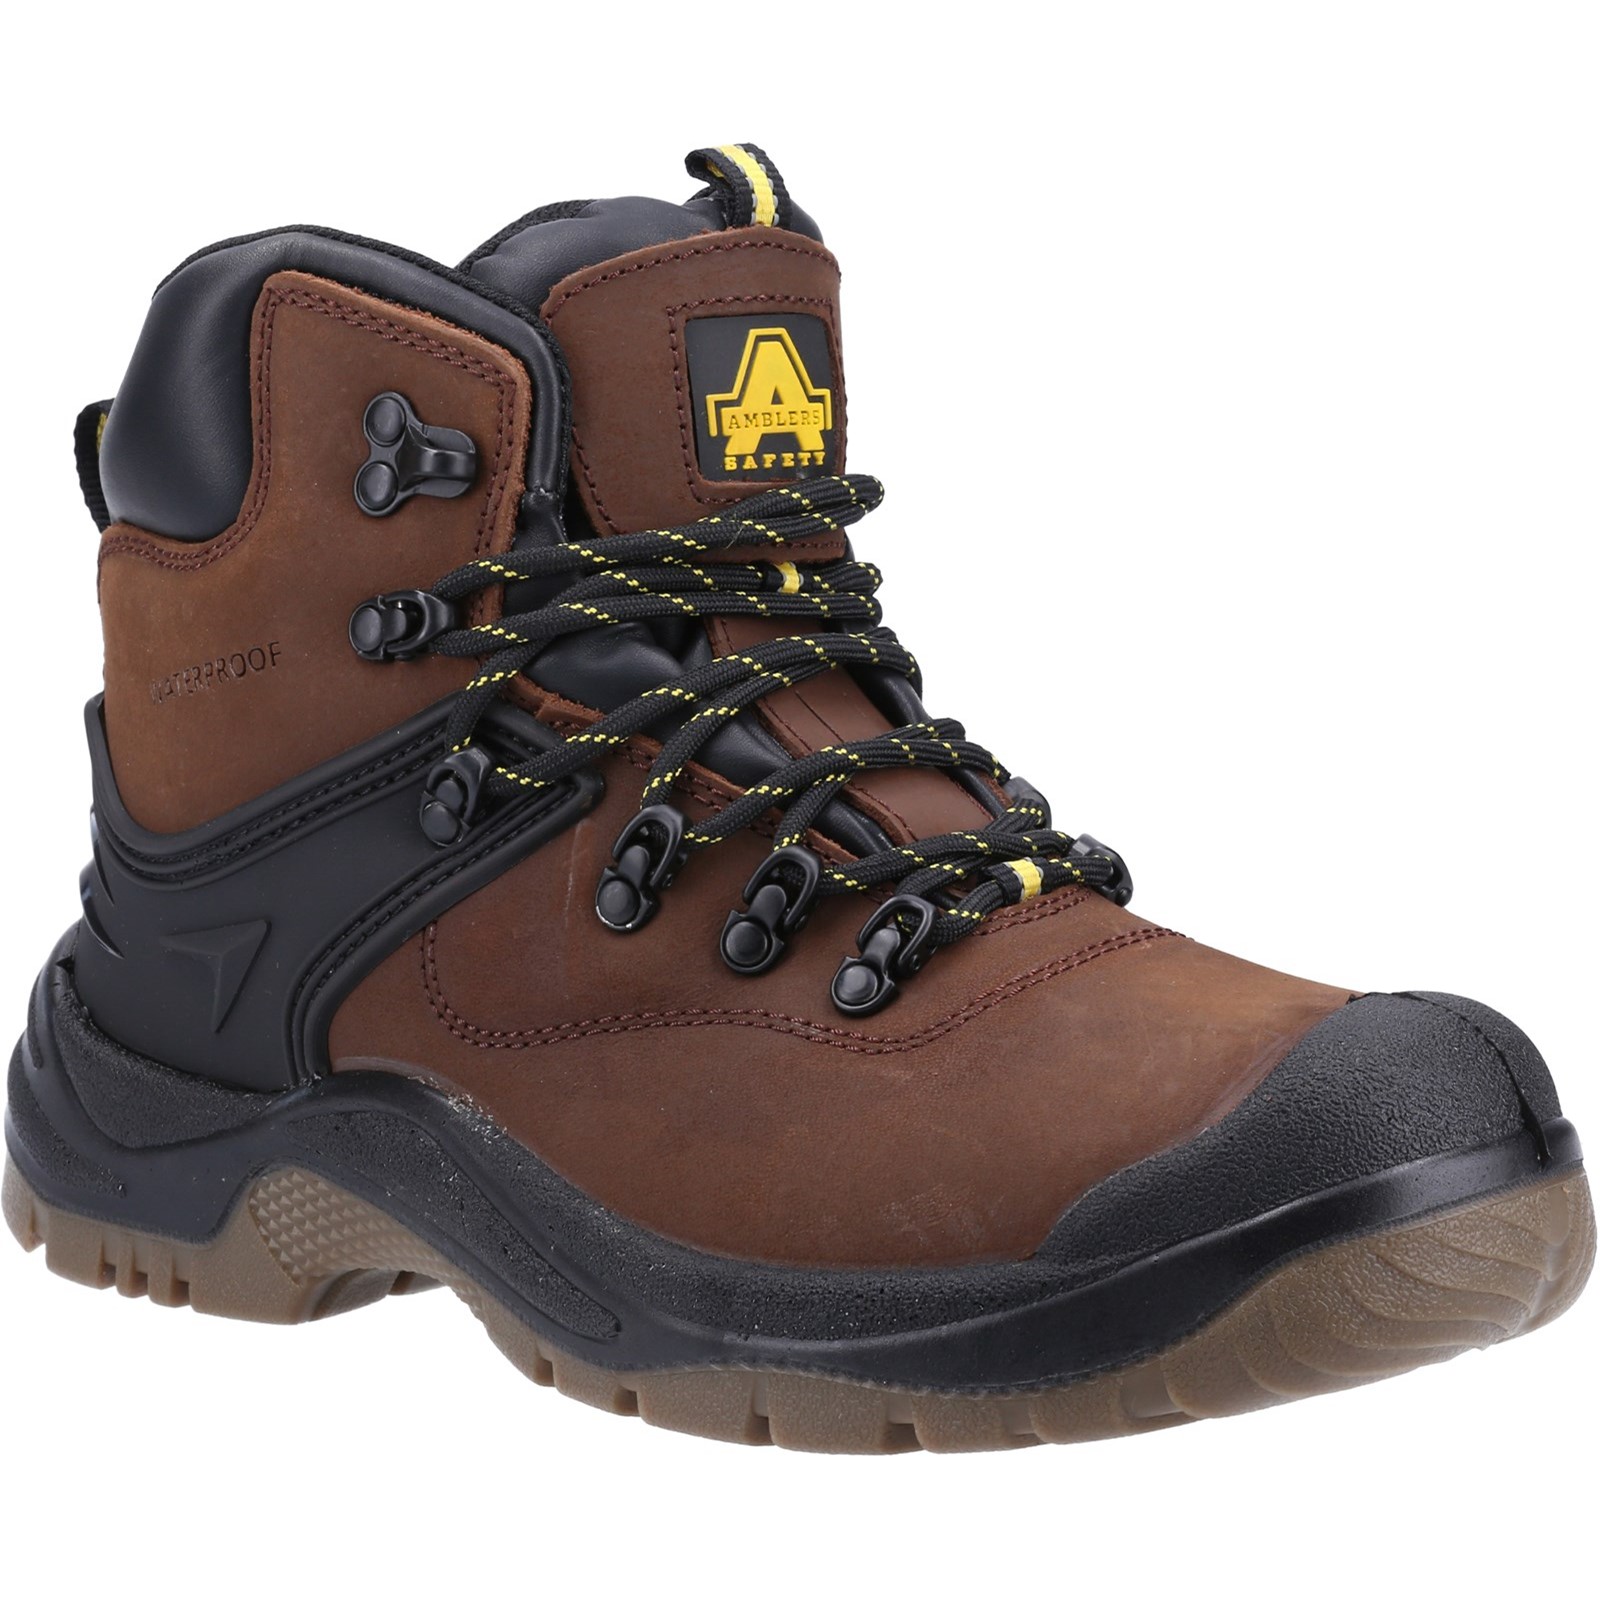 FS197 Shock Absorbing Waterproof Lace up Safety Boot